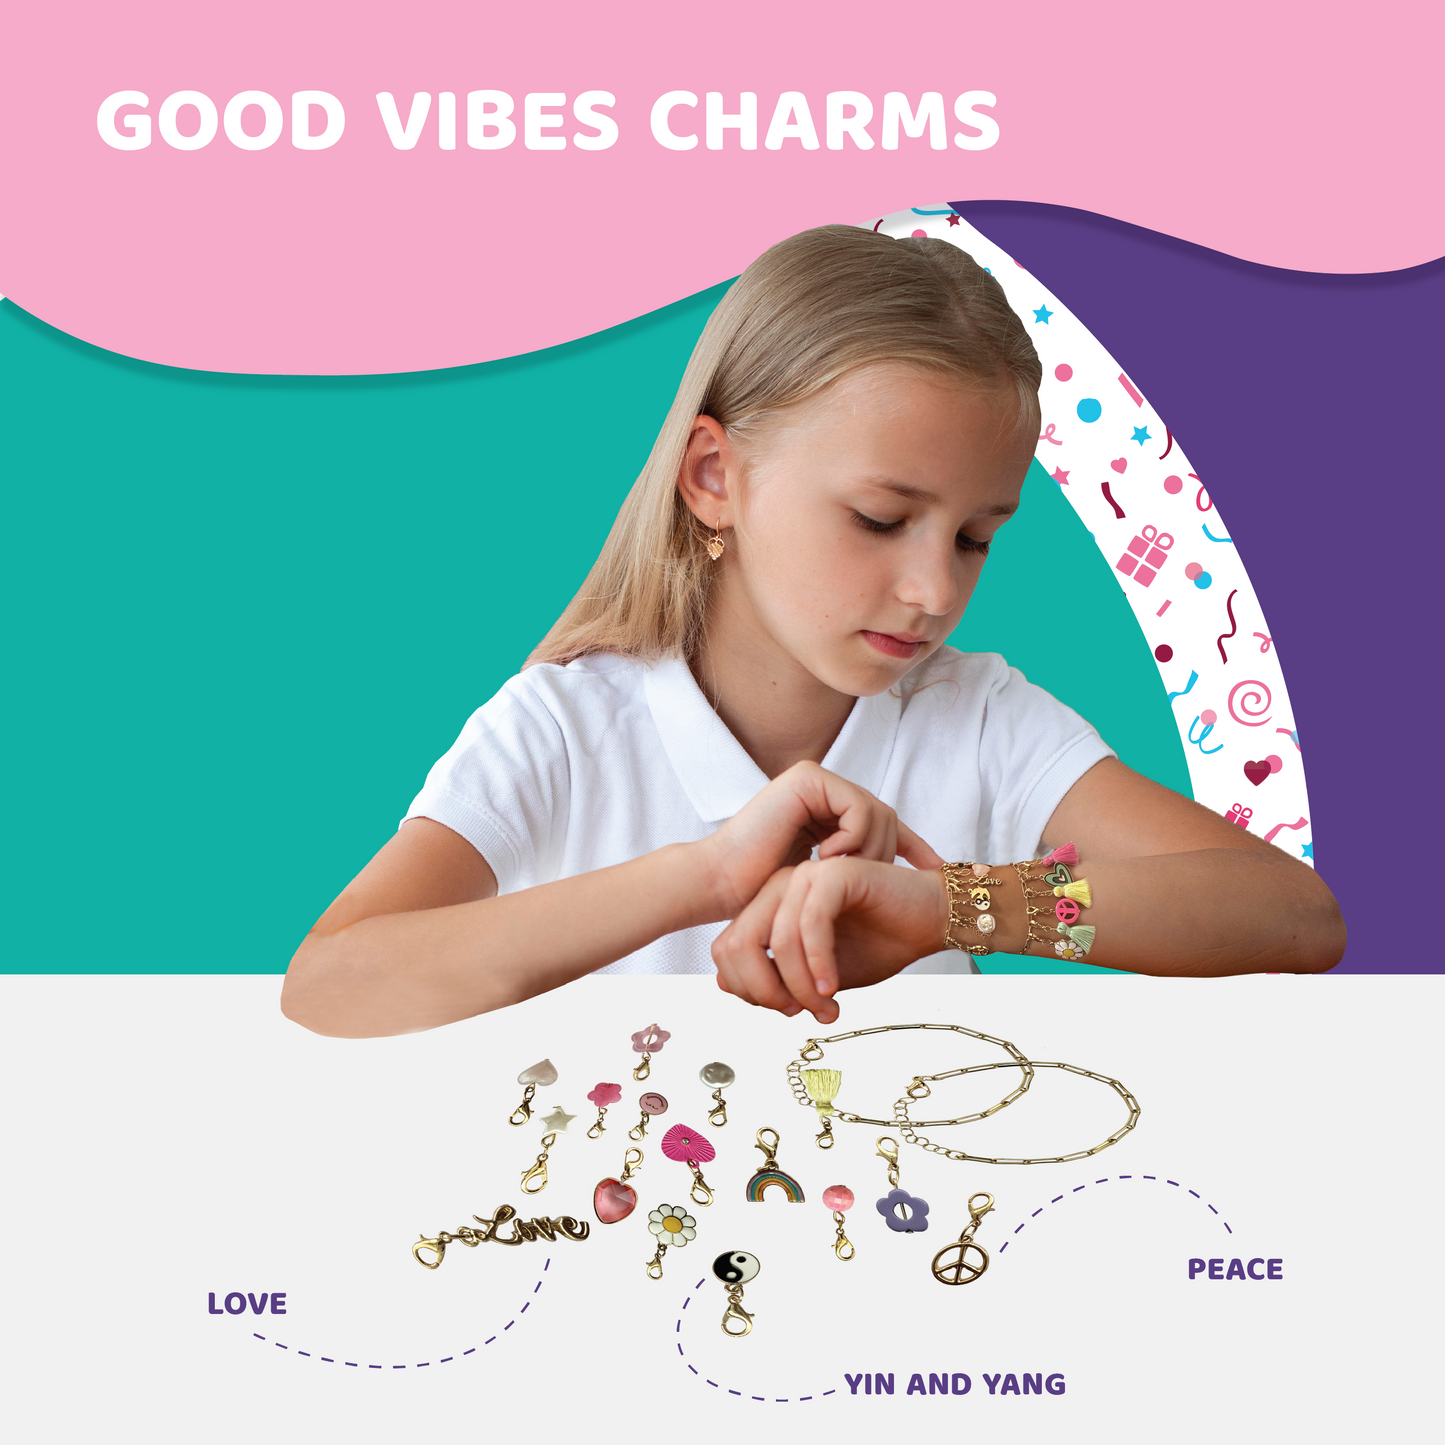 jackinthebox Girls Charm Bracelet Making kit | Includes 4 Bracelets & 55 Charms |Kids Jewelry Making kit for Girls 8-12 | Gifts for 8 9 10 11 12 Year Old Girls | Girl Toys 8-10 Years Old